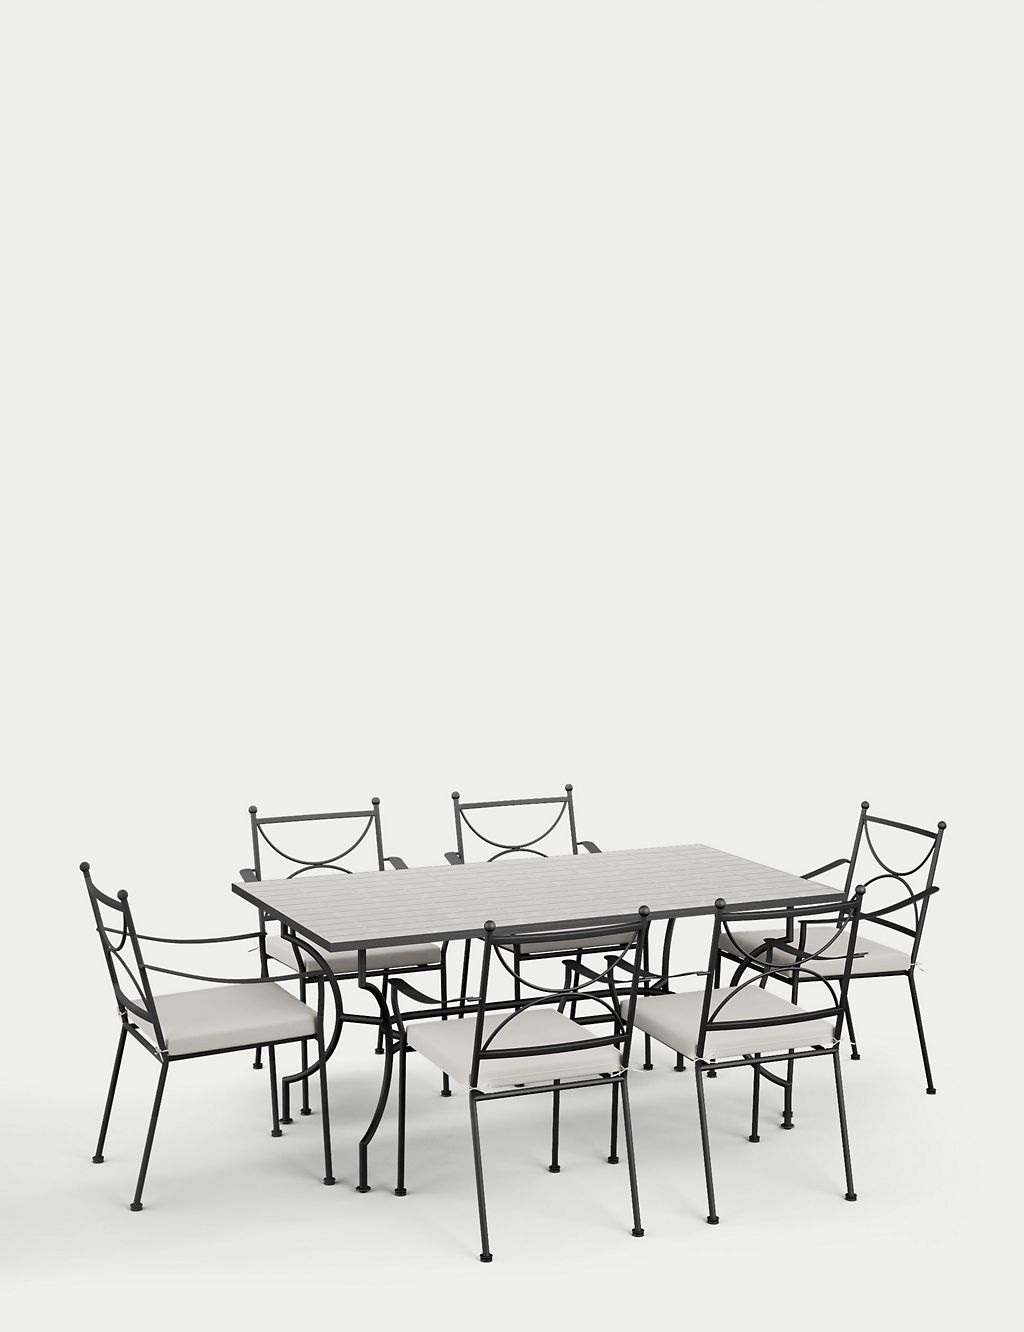 Pembroke 6 Seater Garden Dining Table & Chairs 1 of 6